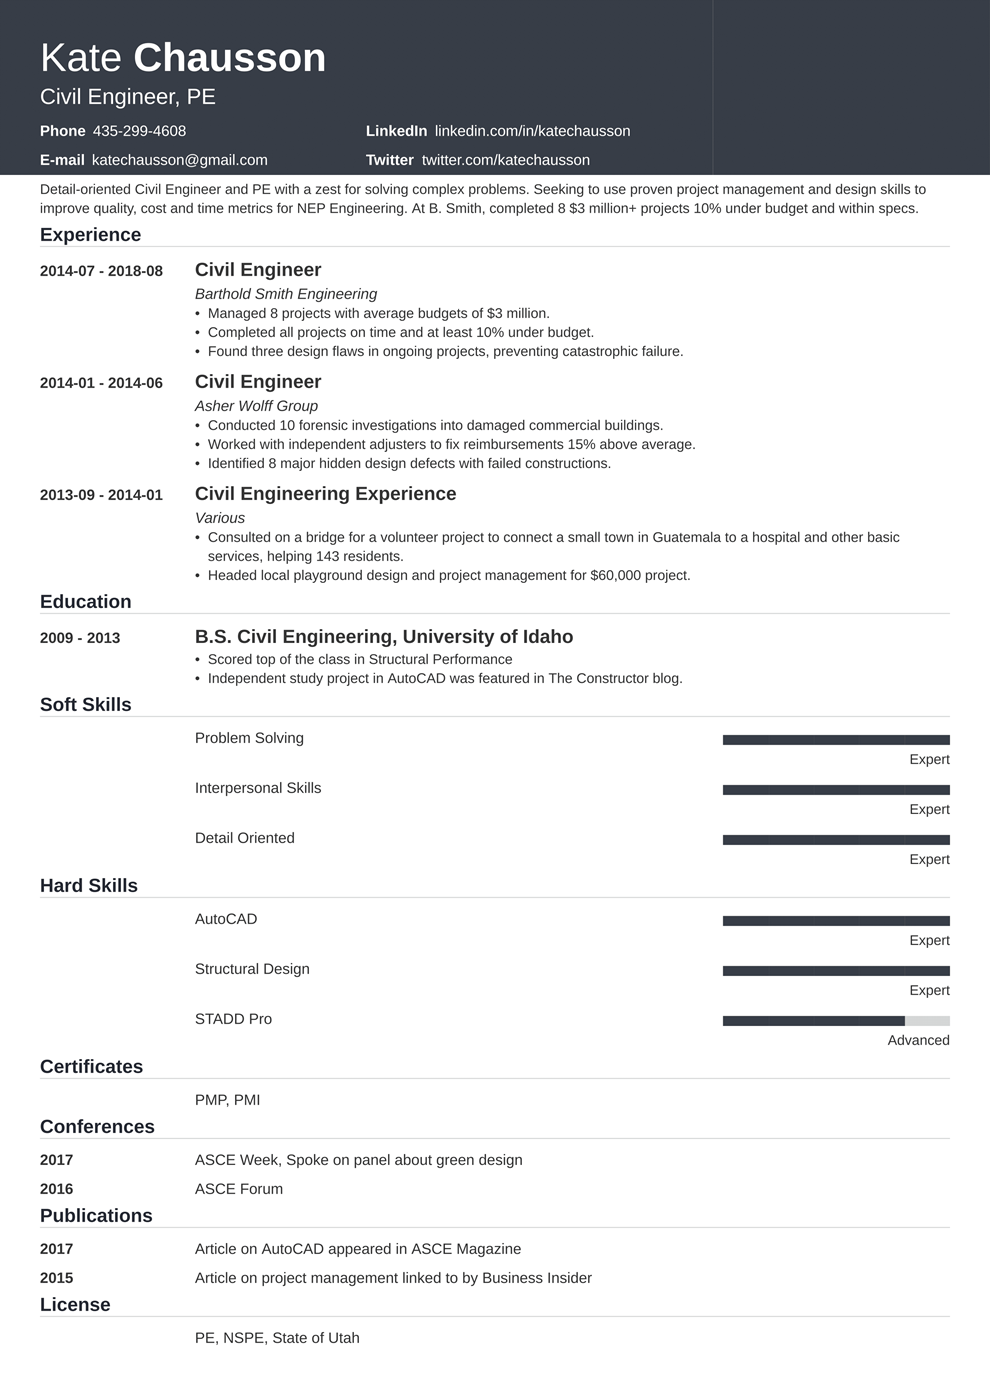 Civil Engineer Cv Template from cdn-images.zety.com